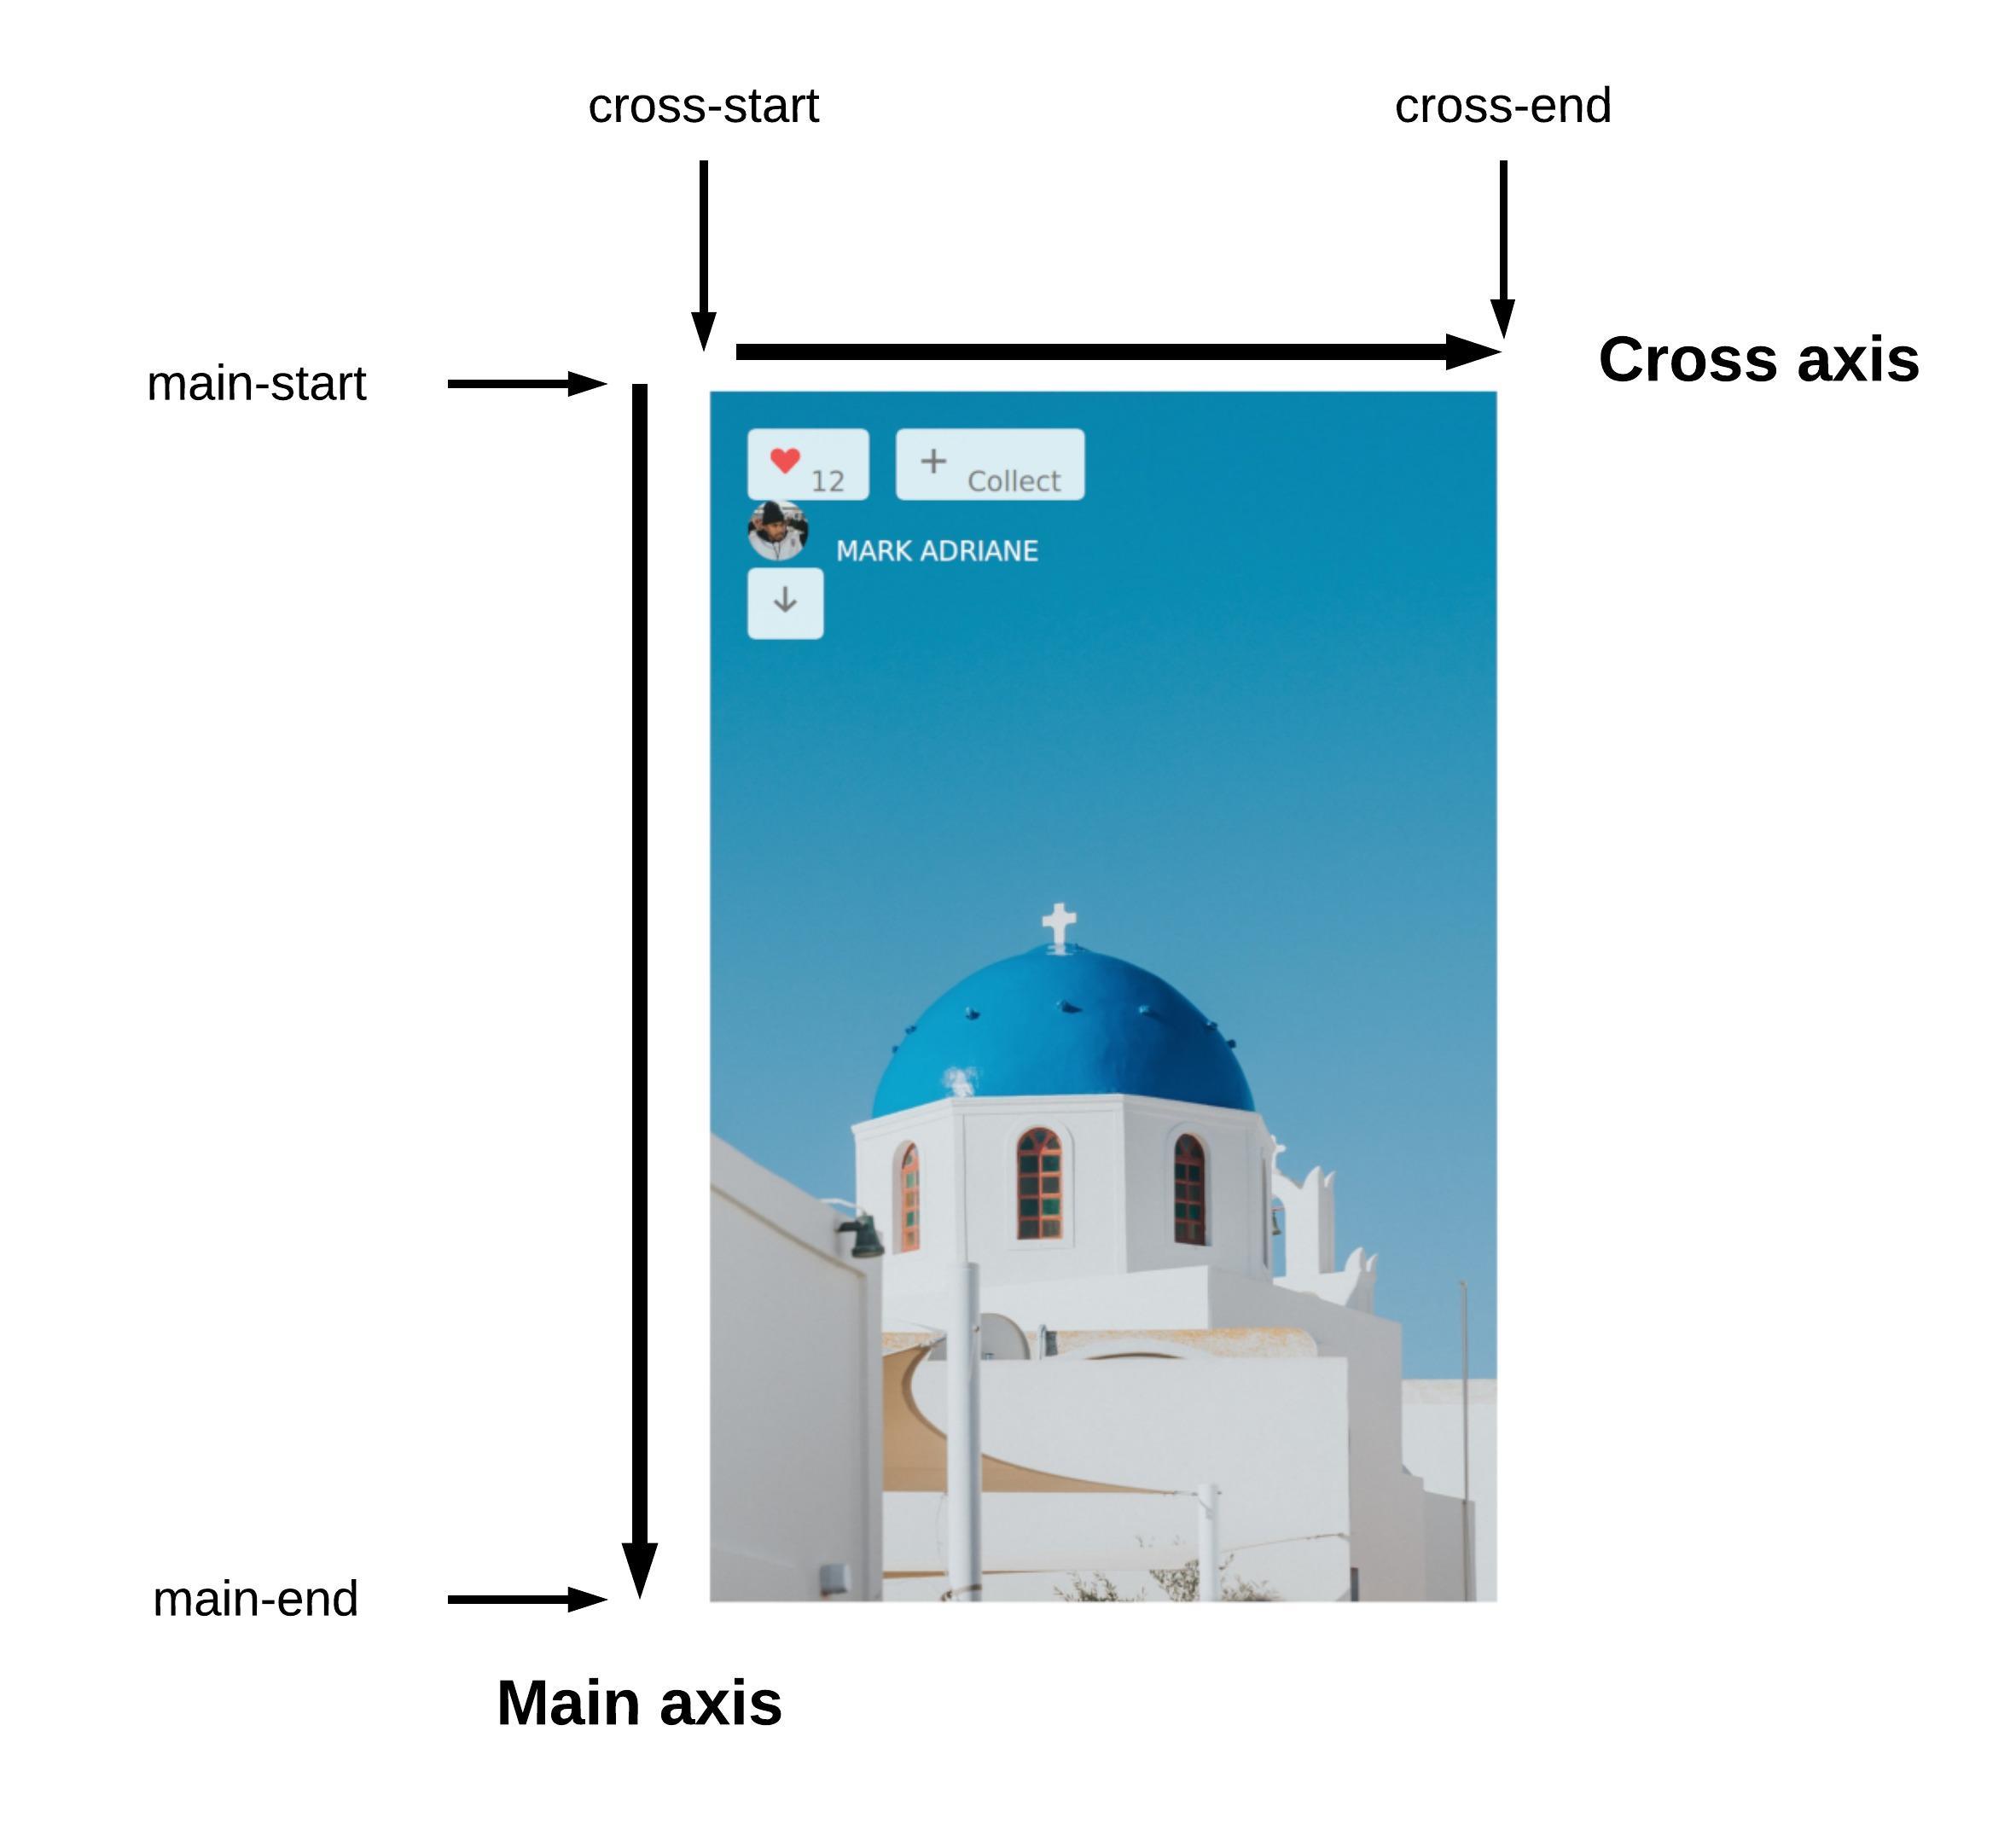 Setting flex-direction to column changes the direction of the main-axis and the cross-axis